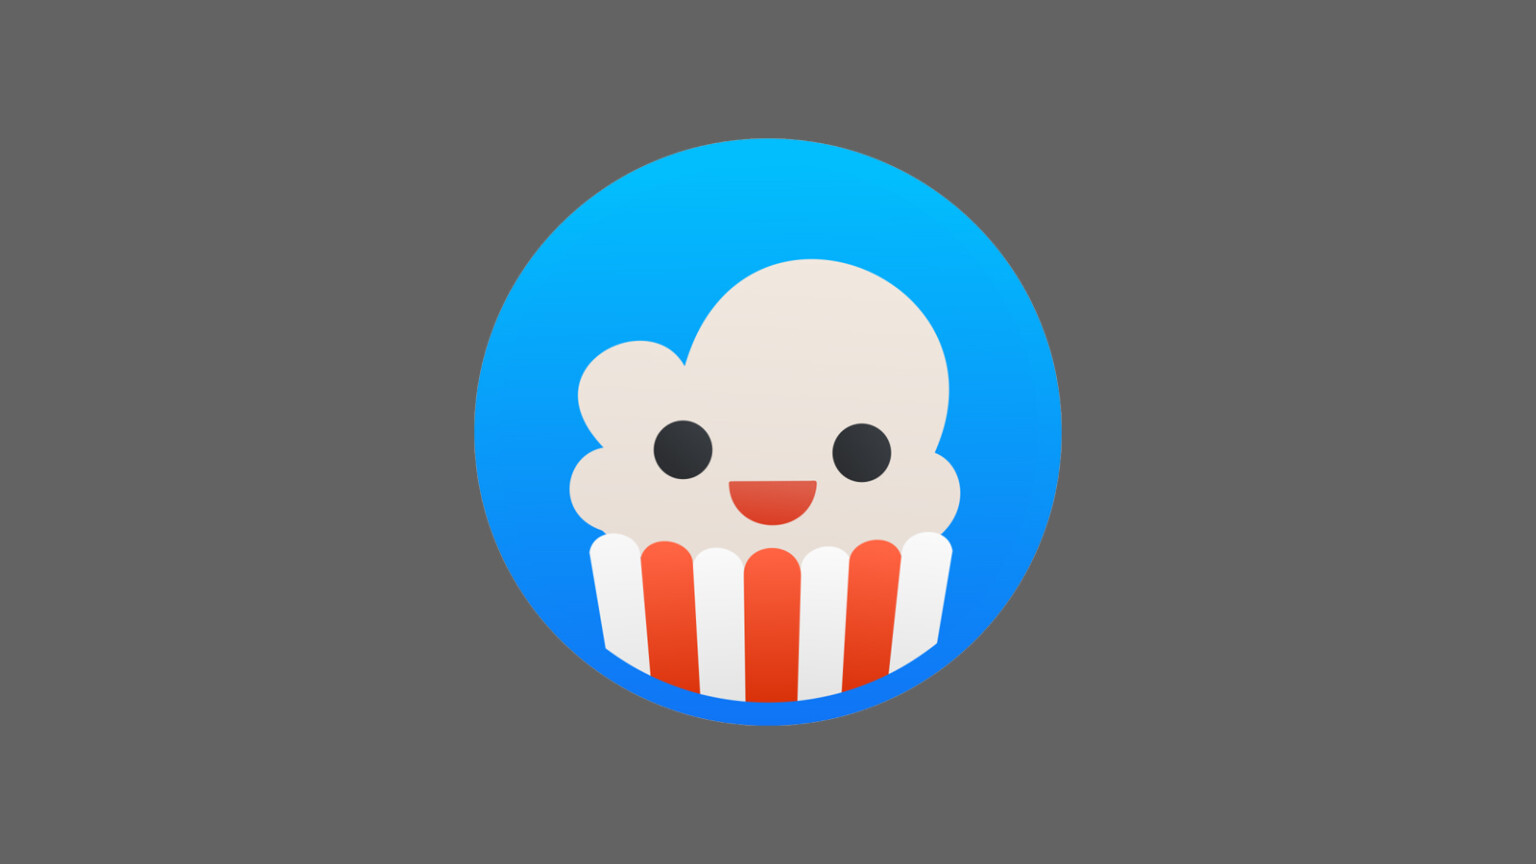 popcorn time for ipad 2022